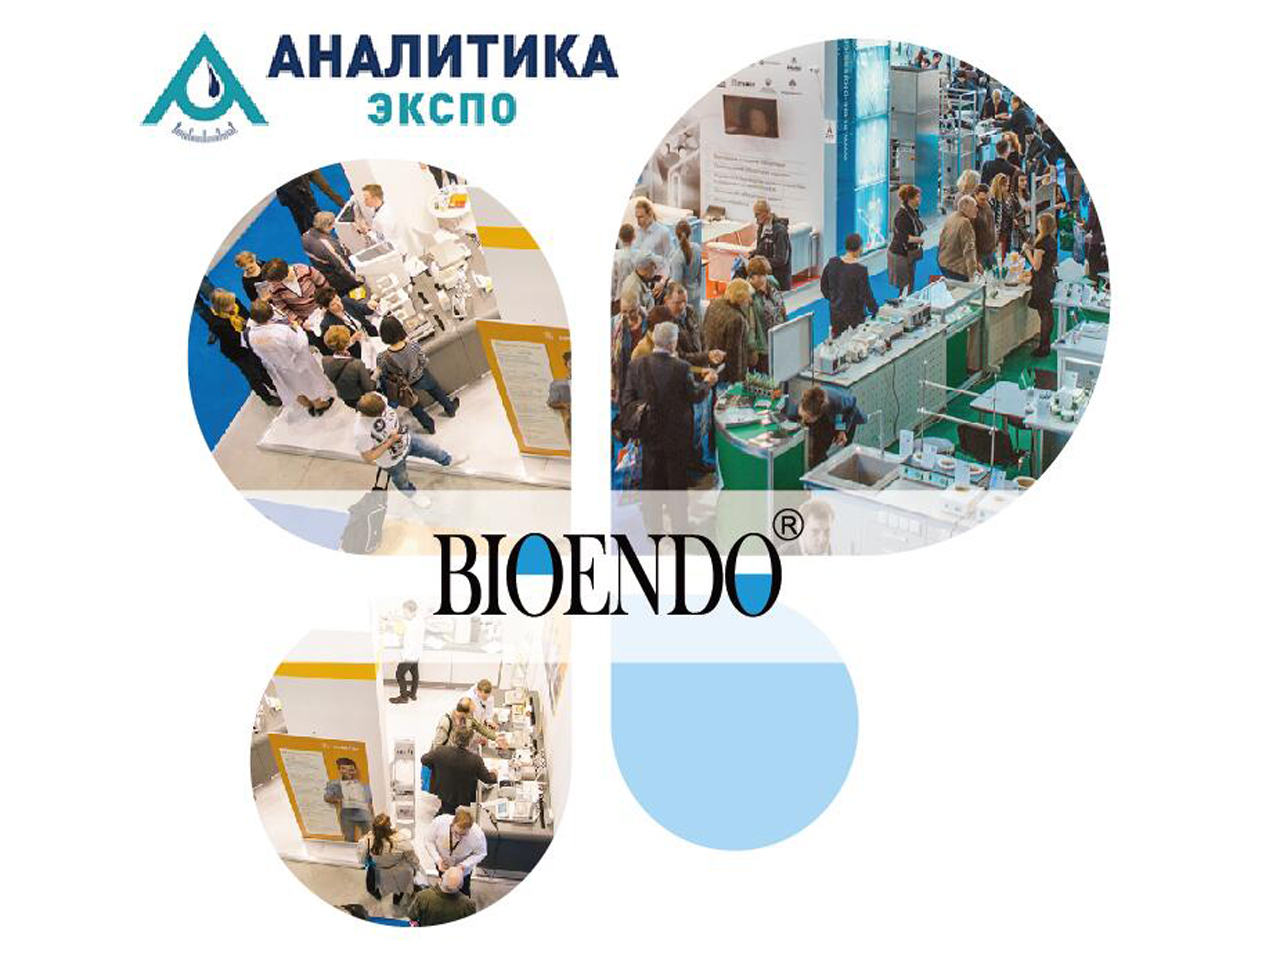 2019 Russia, Moscow, Laboratory Instrument & Chemical Reagents បង្ហាញ